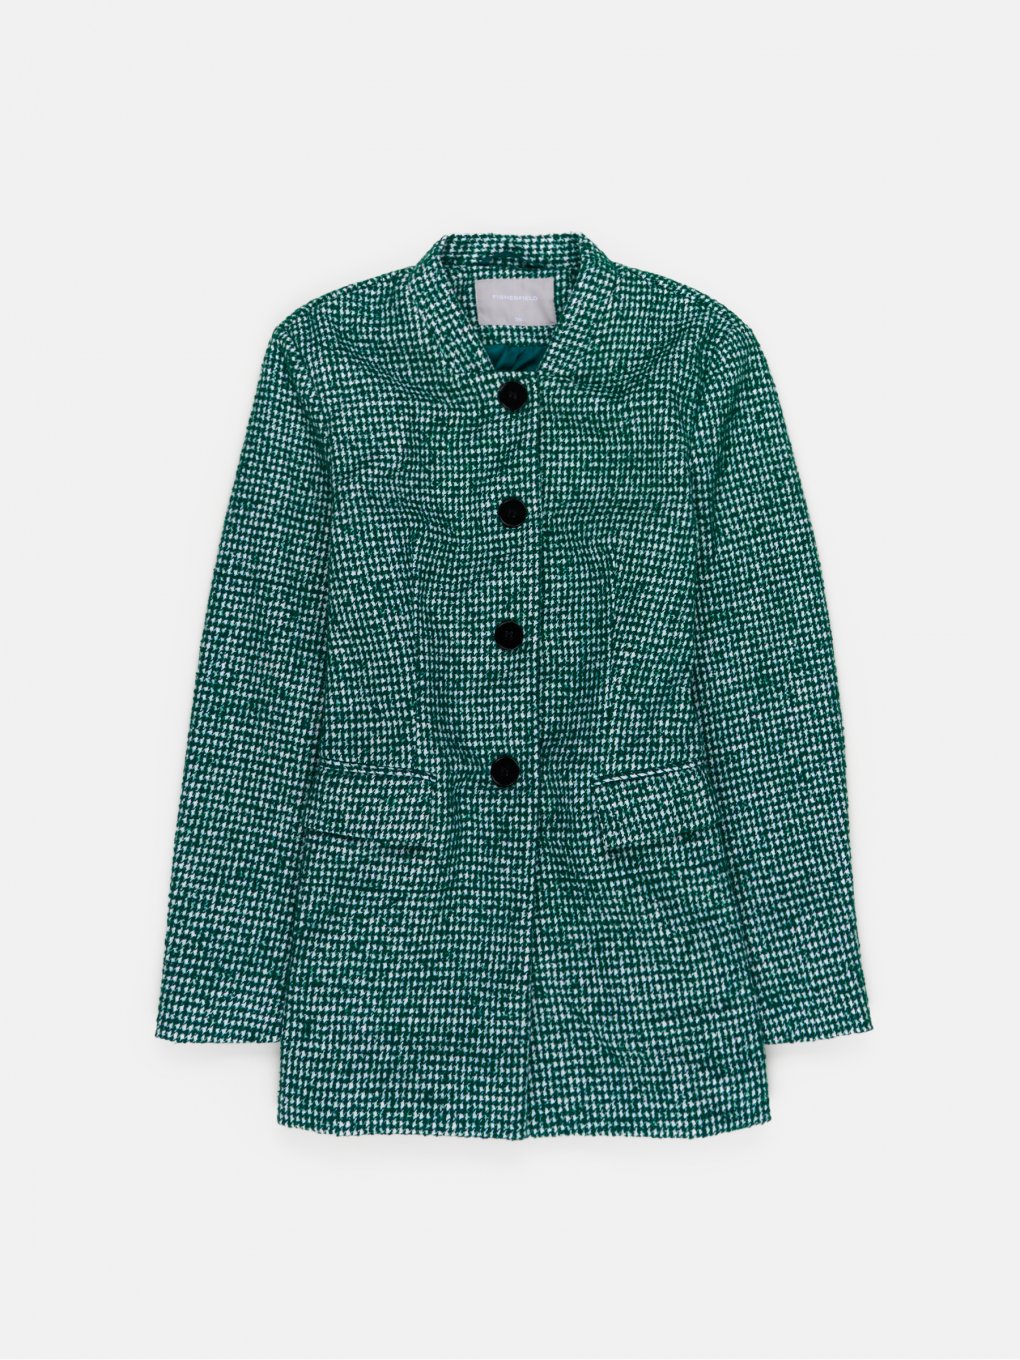 Coat with houndstooth pattern